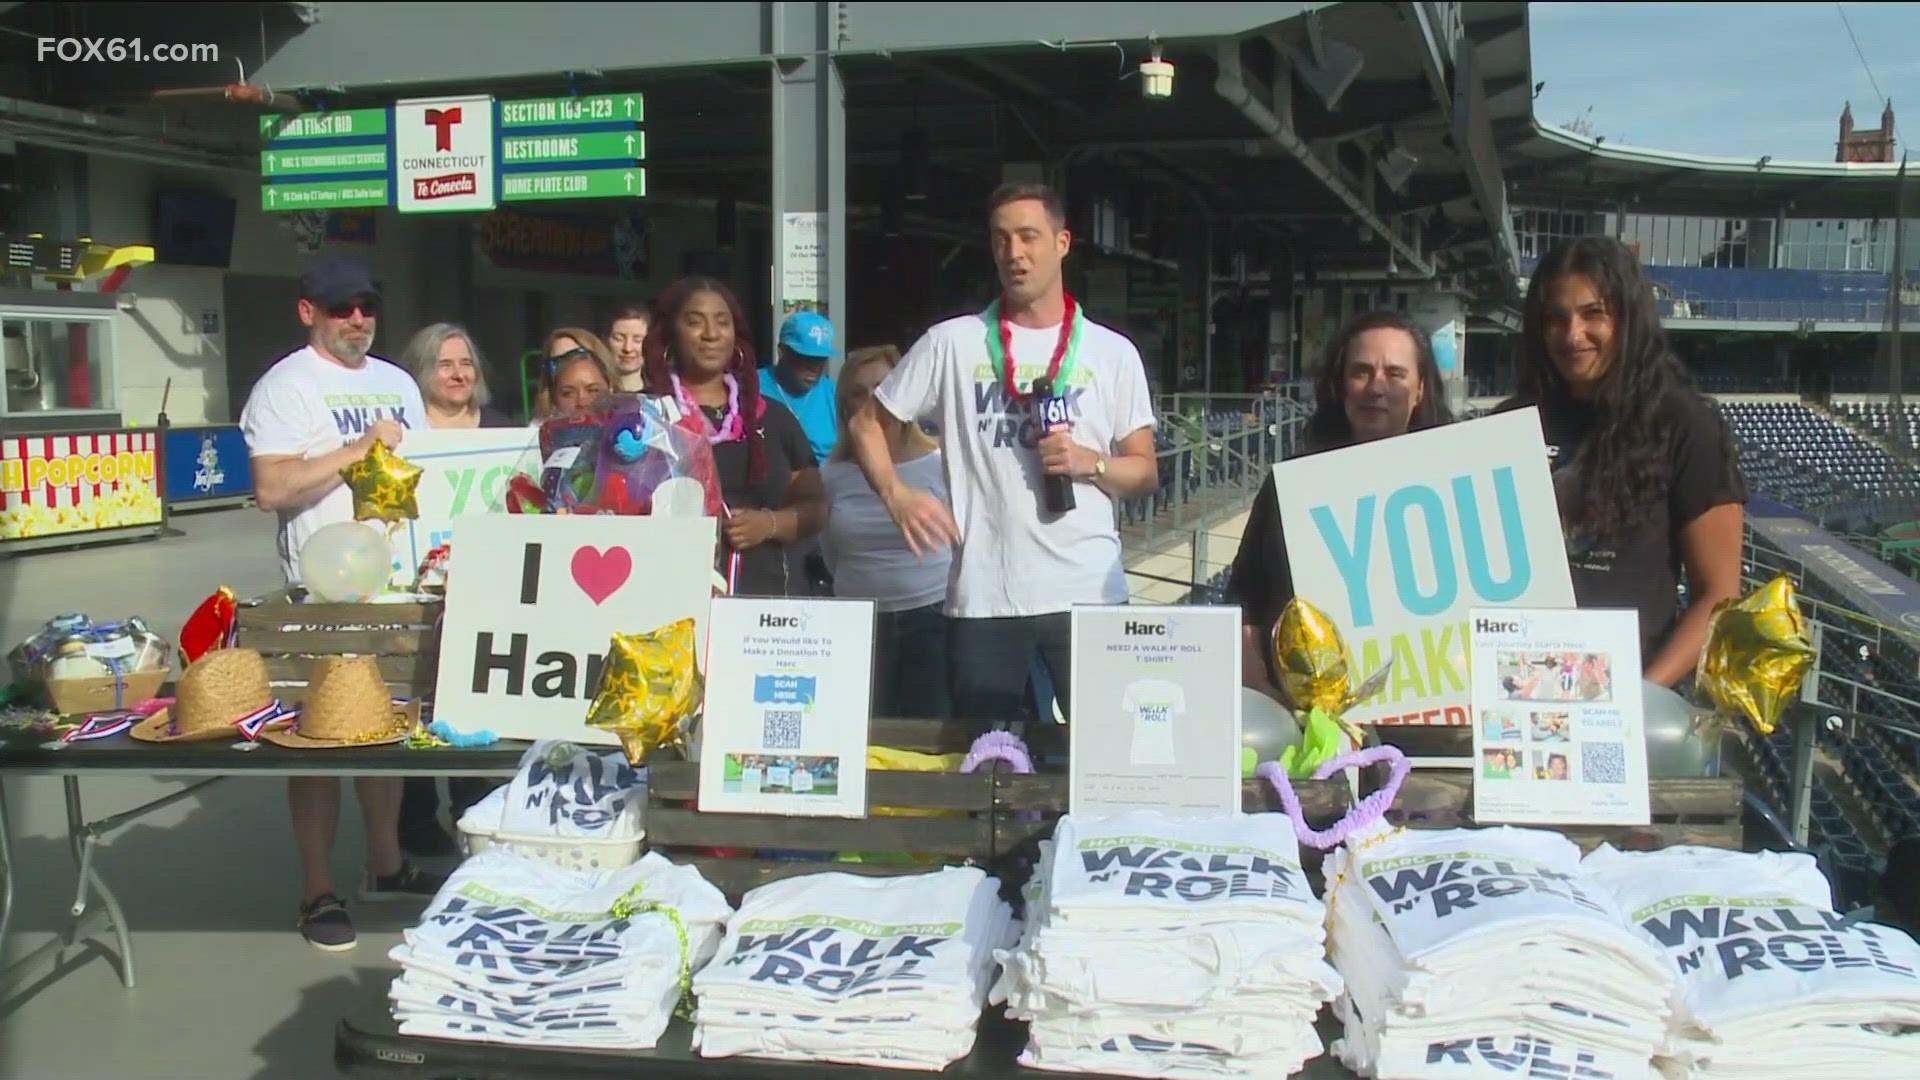 The Harc Walk & Roll is happening from 10a-noon at Dunkin' Park in Hartford.